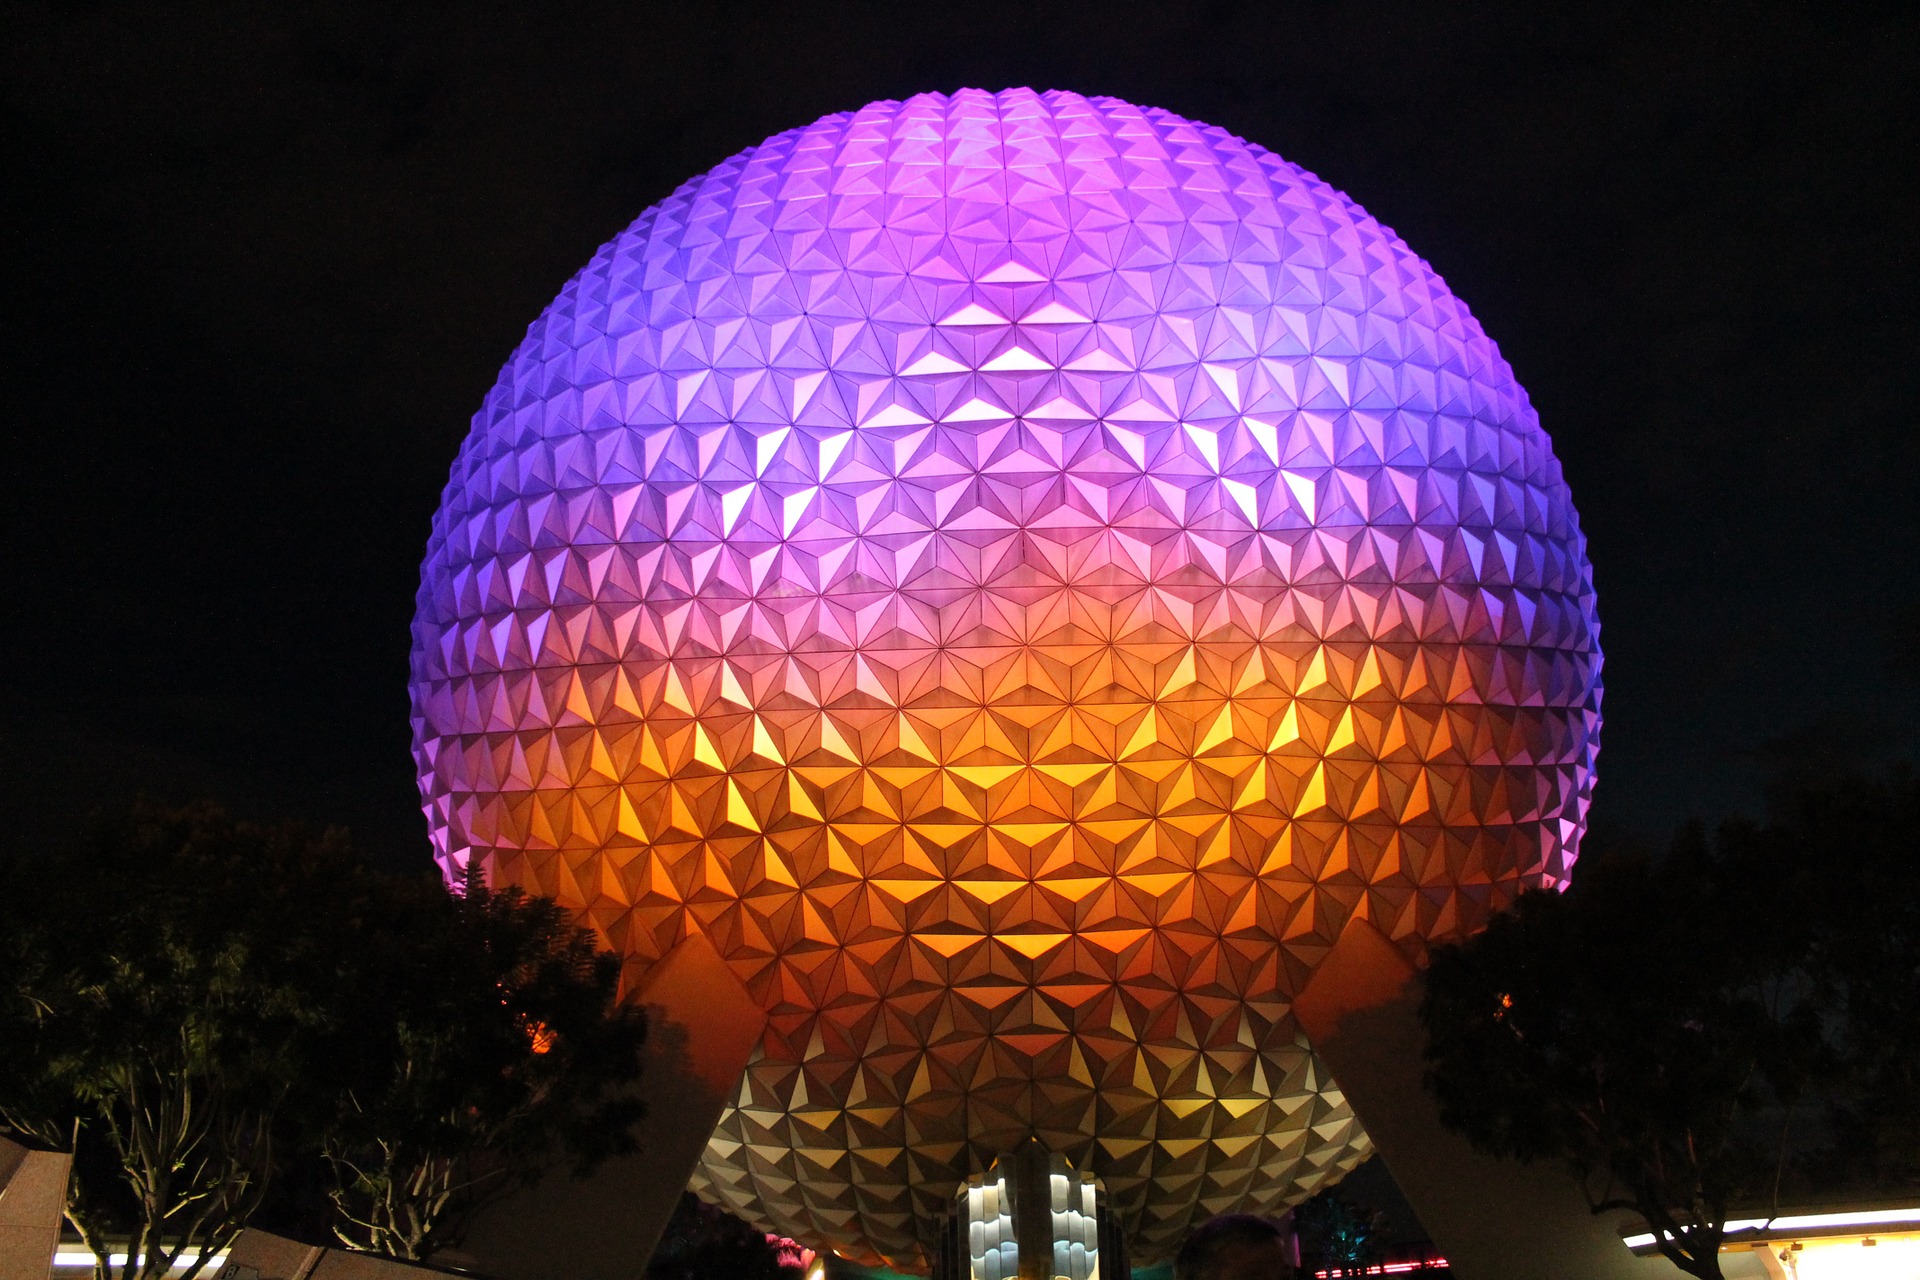 Epcot Center lit up in the night